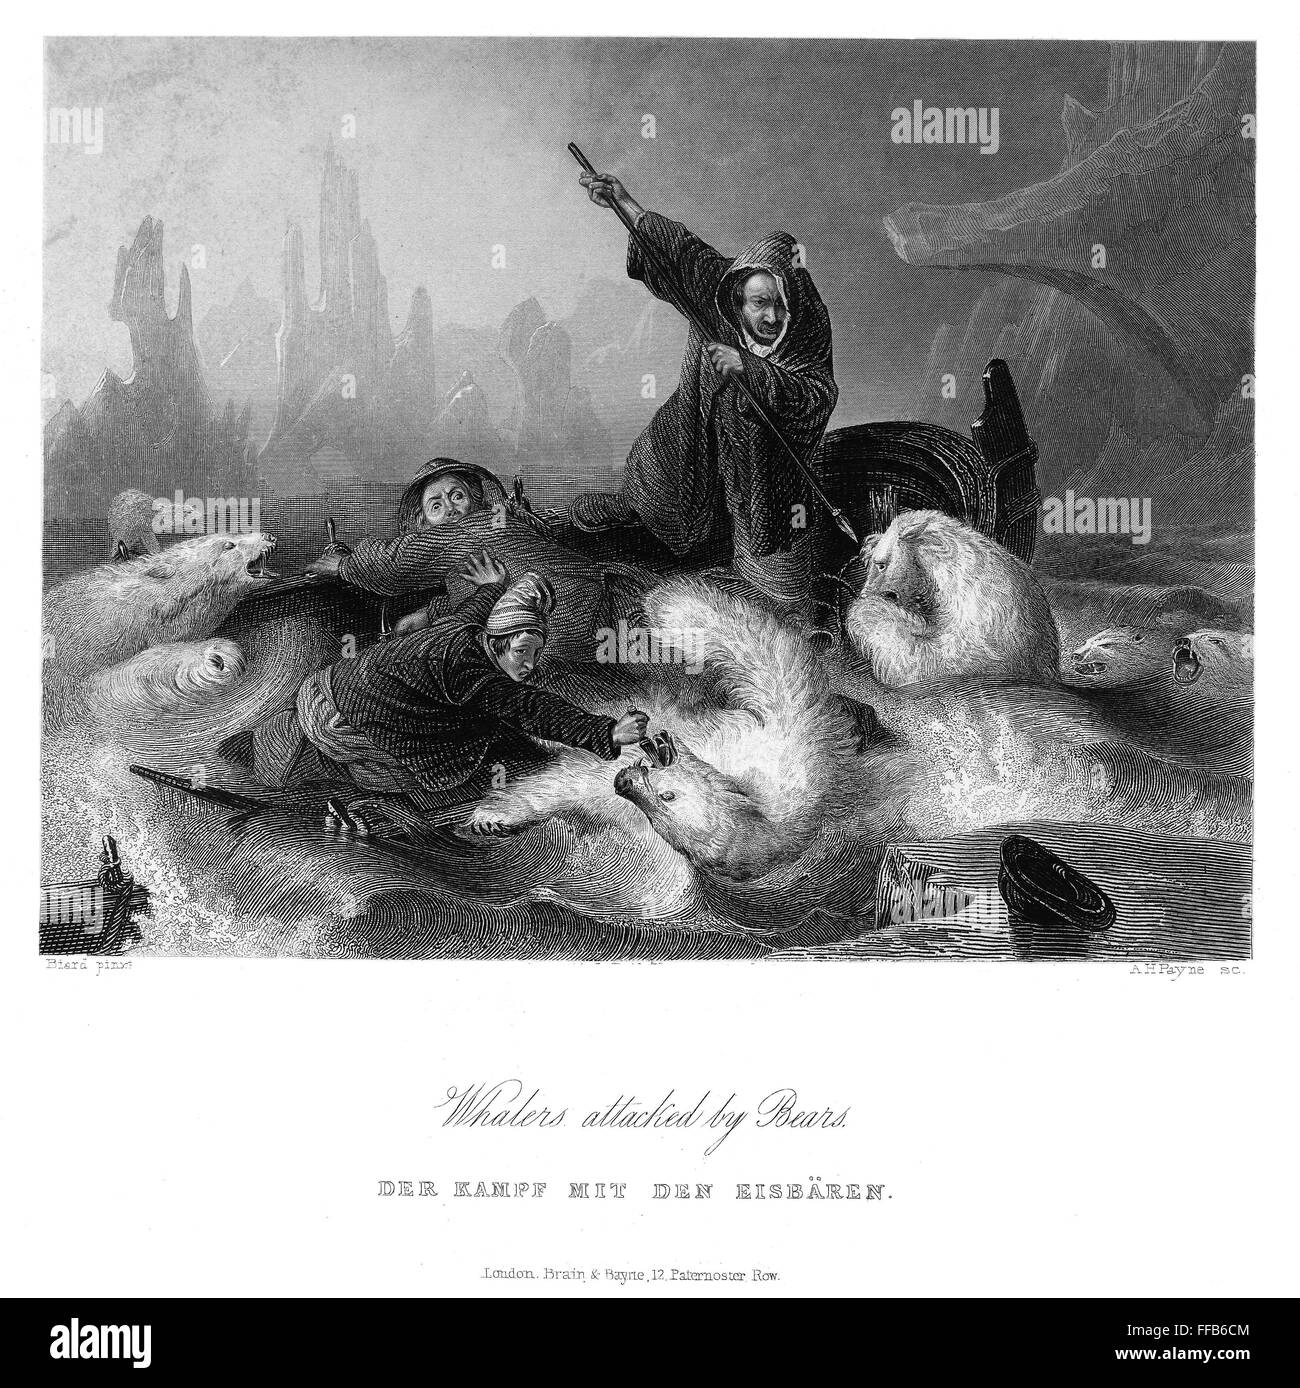 POLAR BEAR ATTACK. /nWhalers attacked by polar bears. Steel engraving, English, c1840, after a painting by Franτois Auguste Biard. Stock Photo